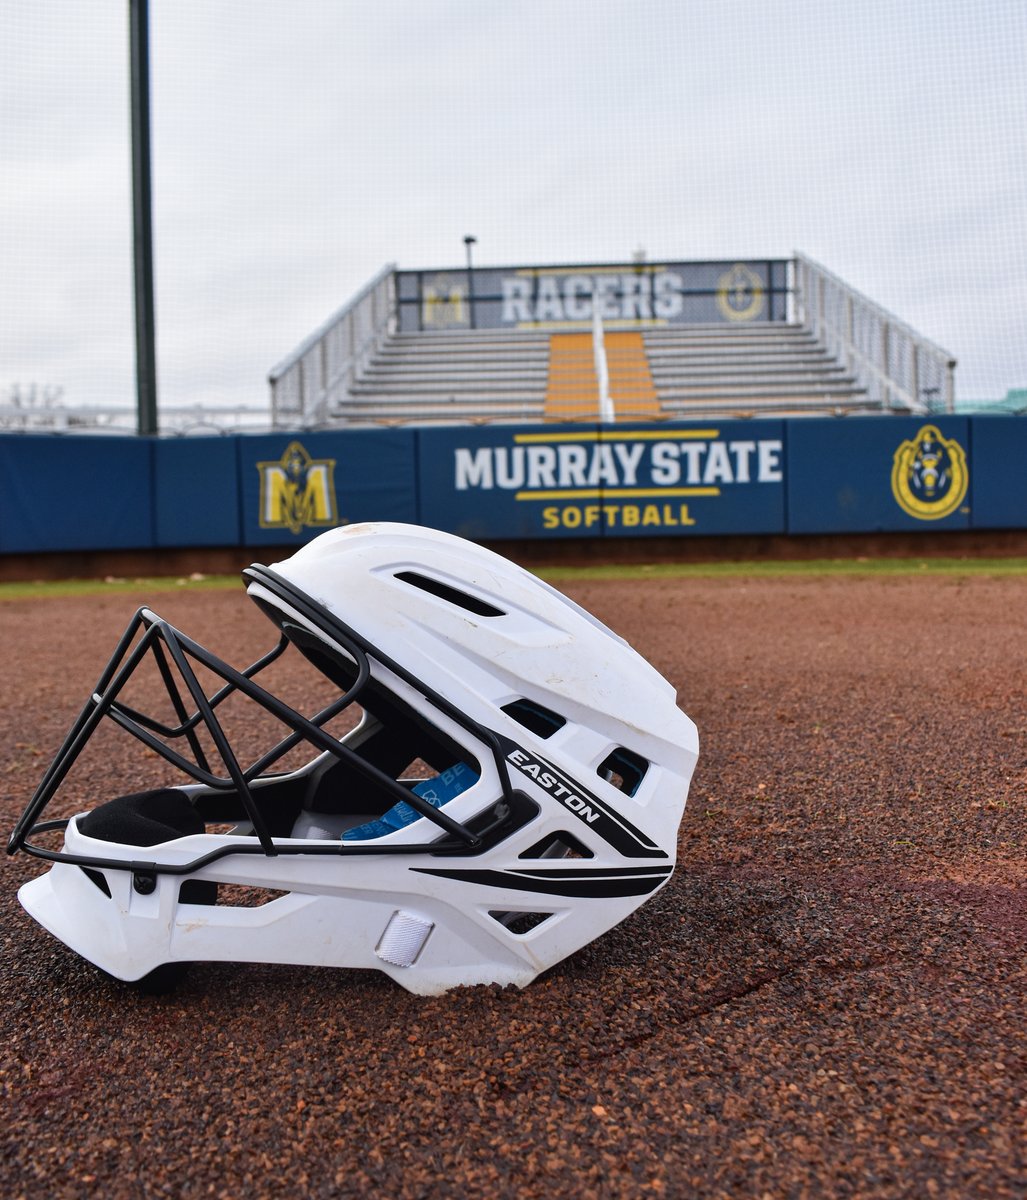 𝙂𝙀𝘼𝙍𝙀𝘿 𝙐𝙋 for the upcoming season! #GoRacers🏇 | @EastonFastpitch